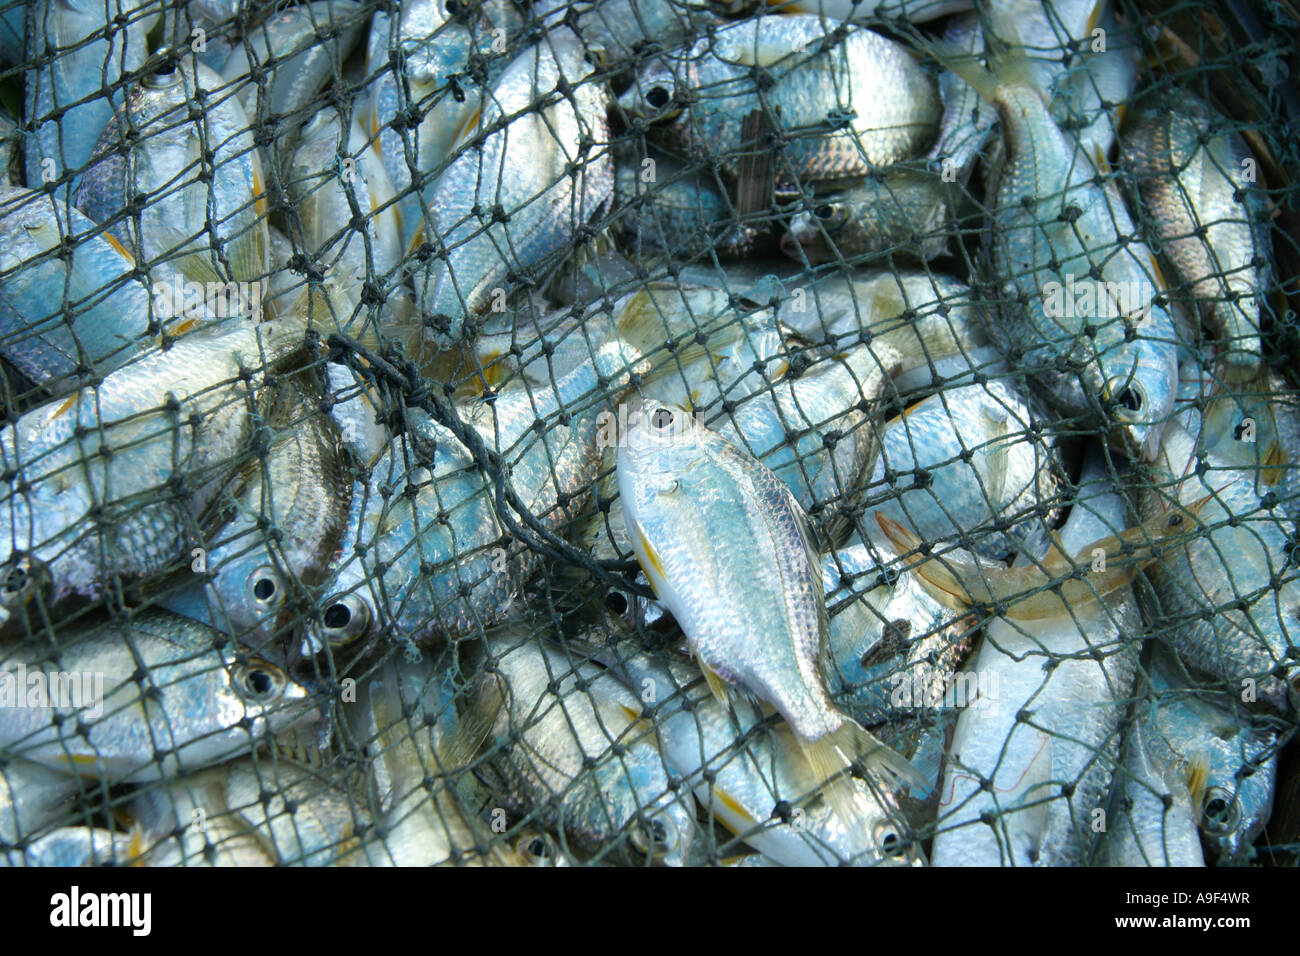 https://c8.alamy.com/comp/A9F4WR/basket-of-small-fish-caught-by-the-fisherman-of-the-chinese-fishing-A9F4WR.jpg